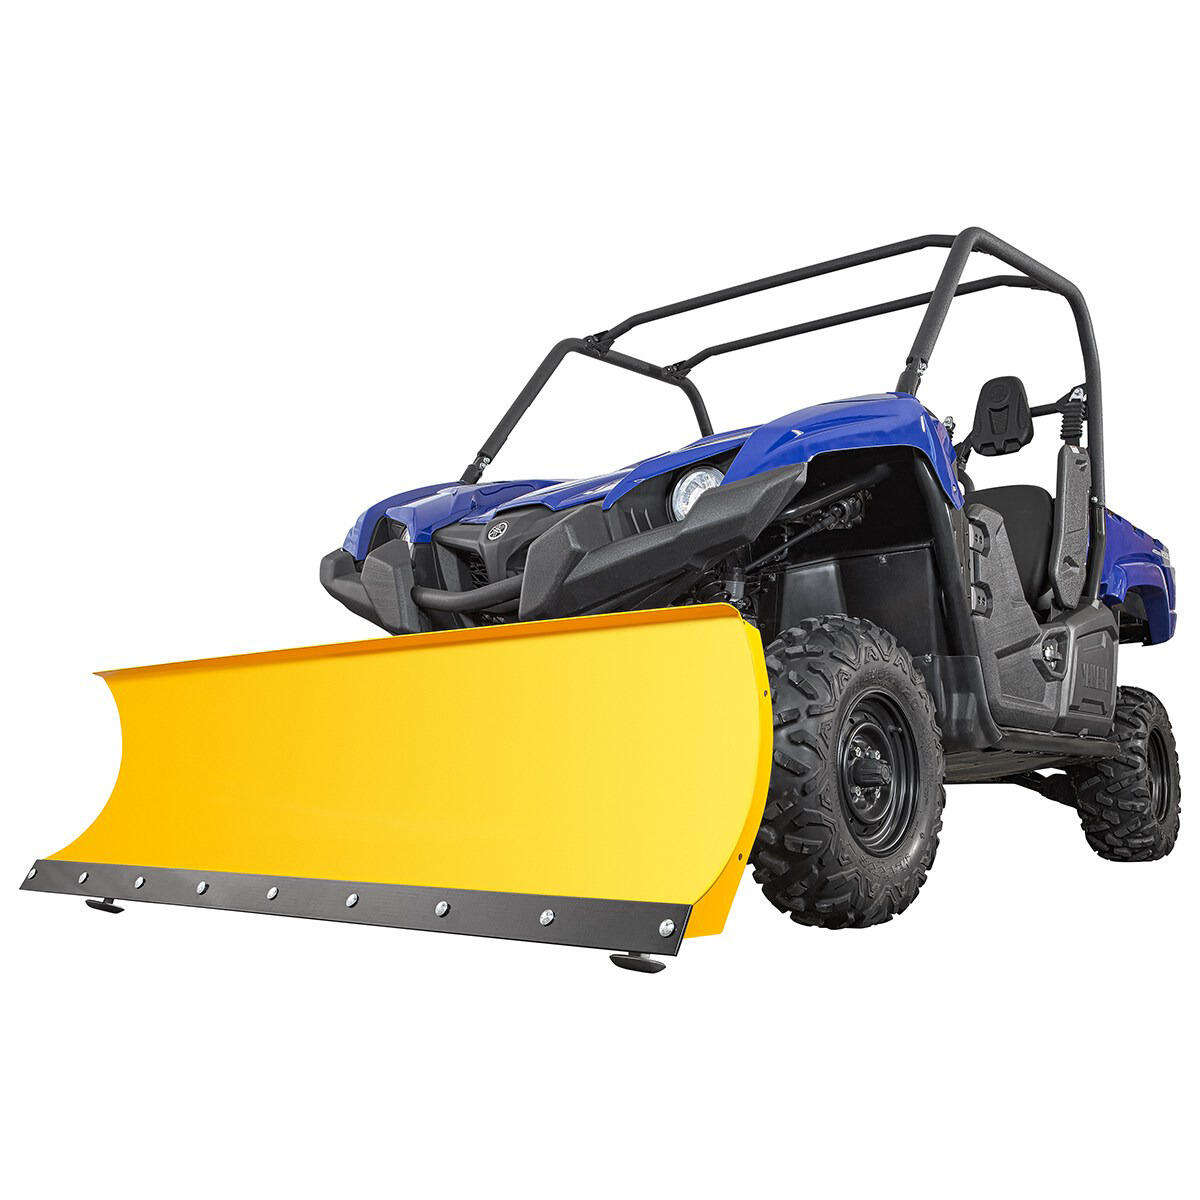 This mount is required to install the snow plough 72"